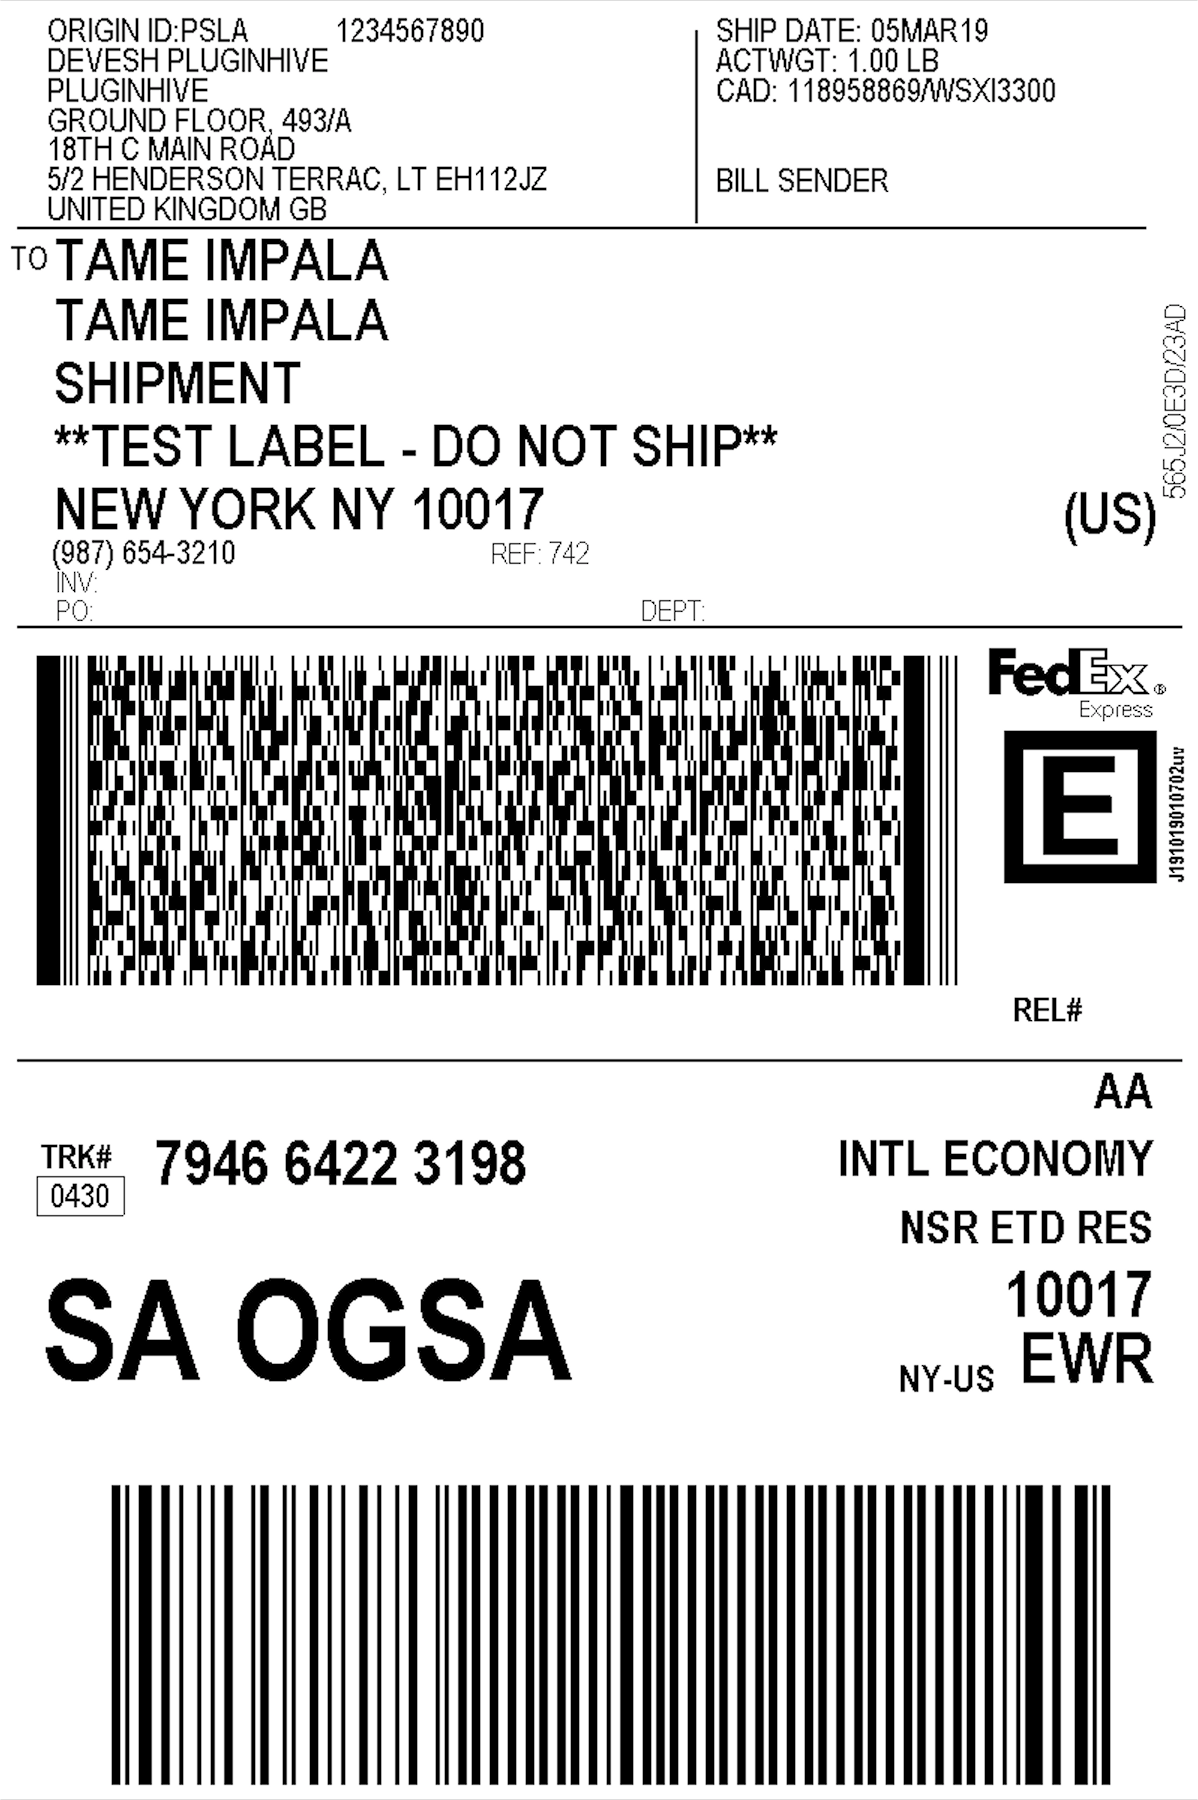 30 Fedex Freight Shipping Label Labels Design Ideas 2020